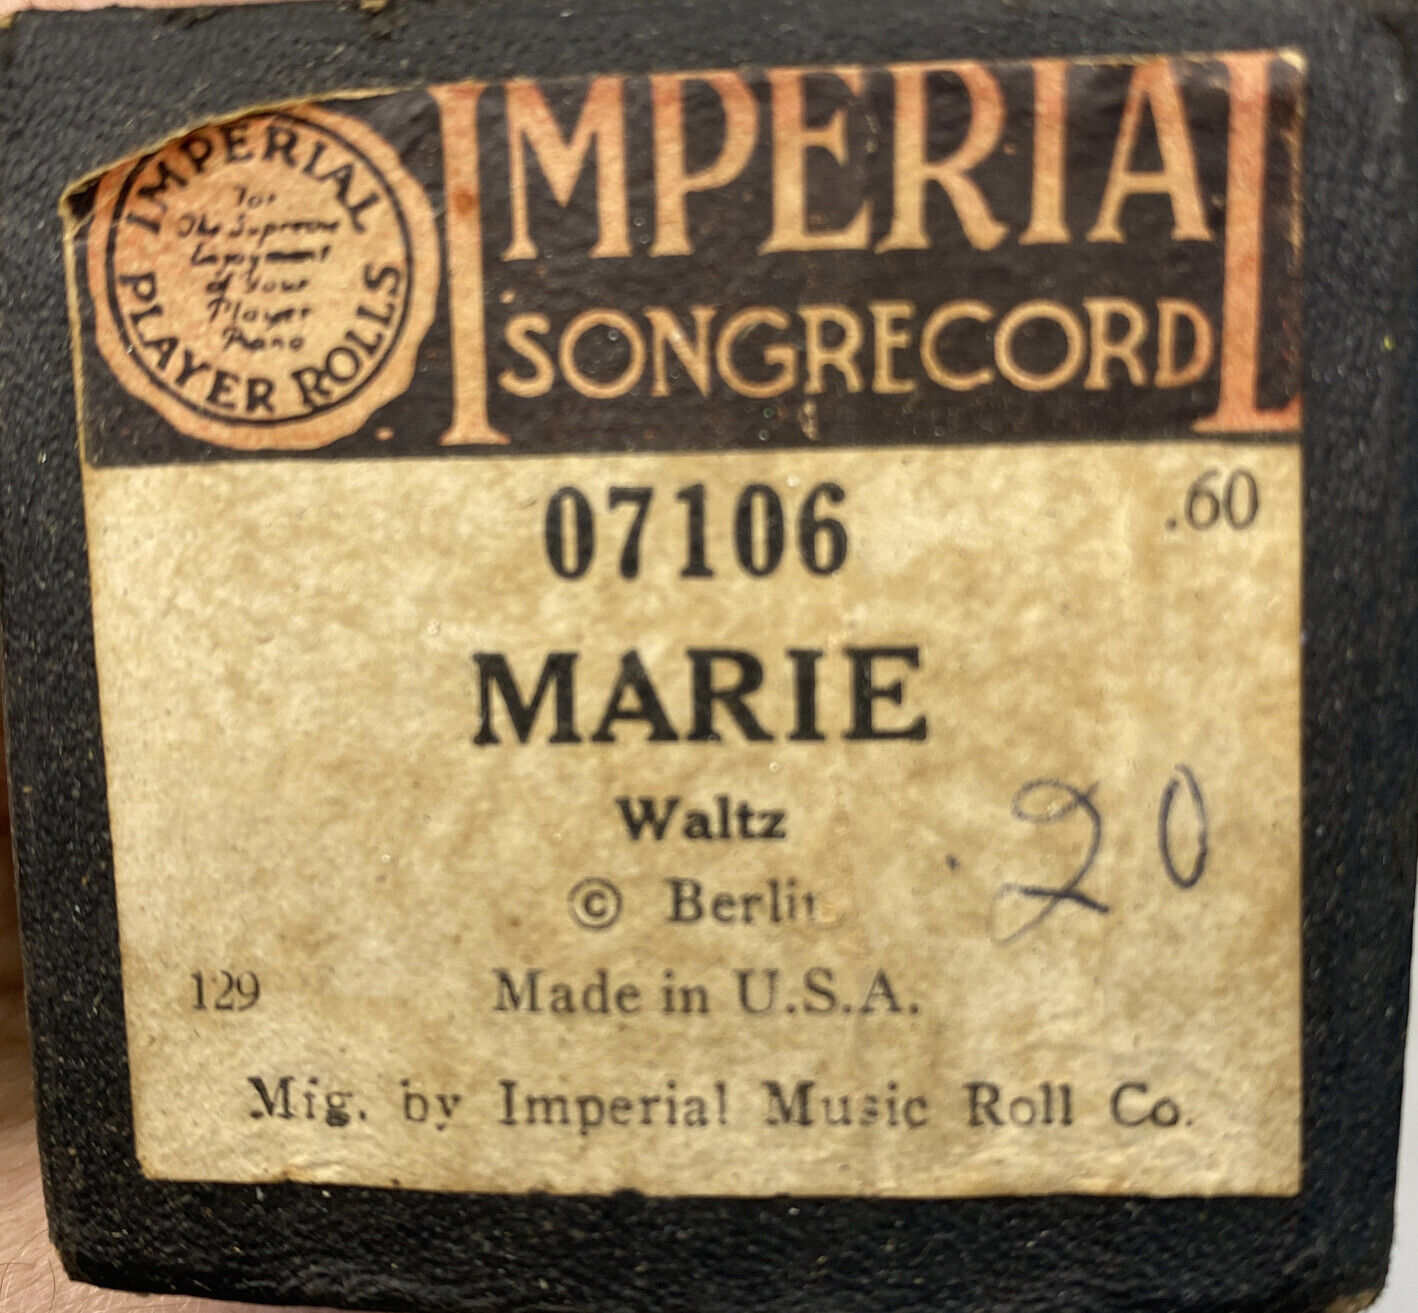 Vintage Imperial Songrecord 07106  MARIE WALTZ Player Piano Roll